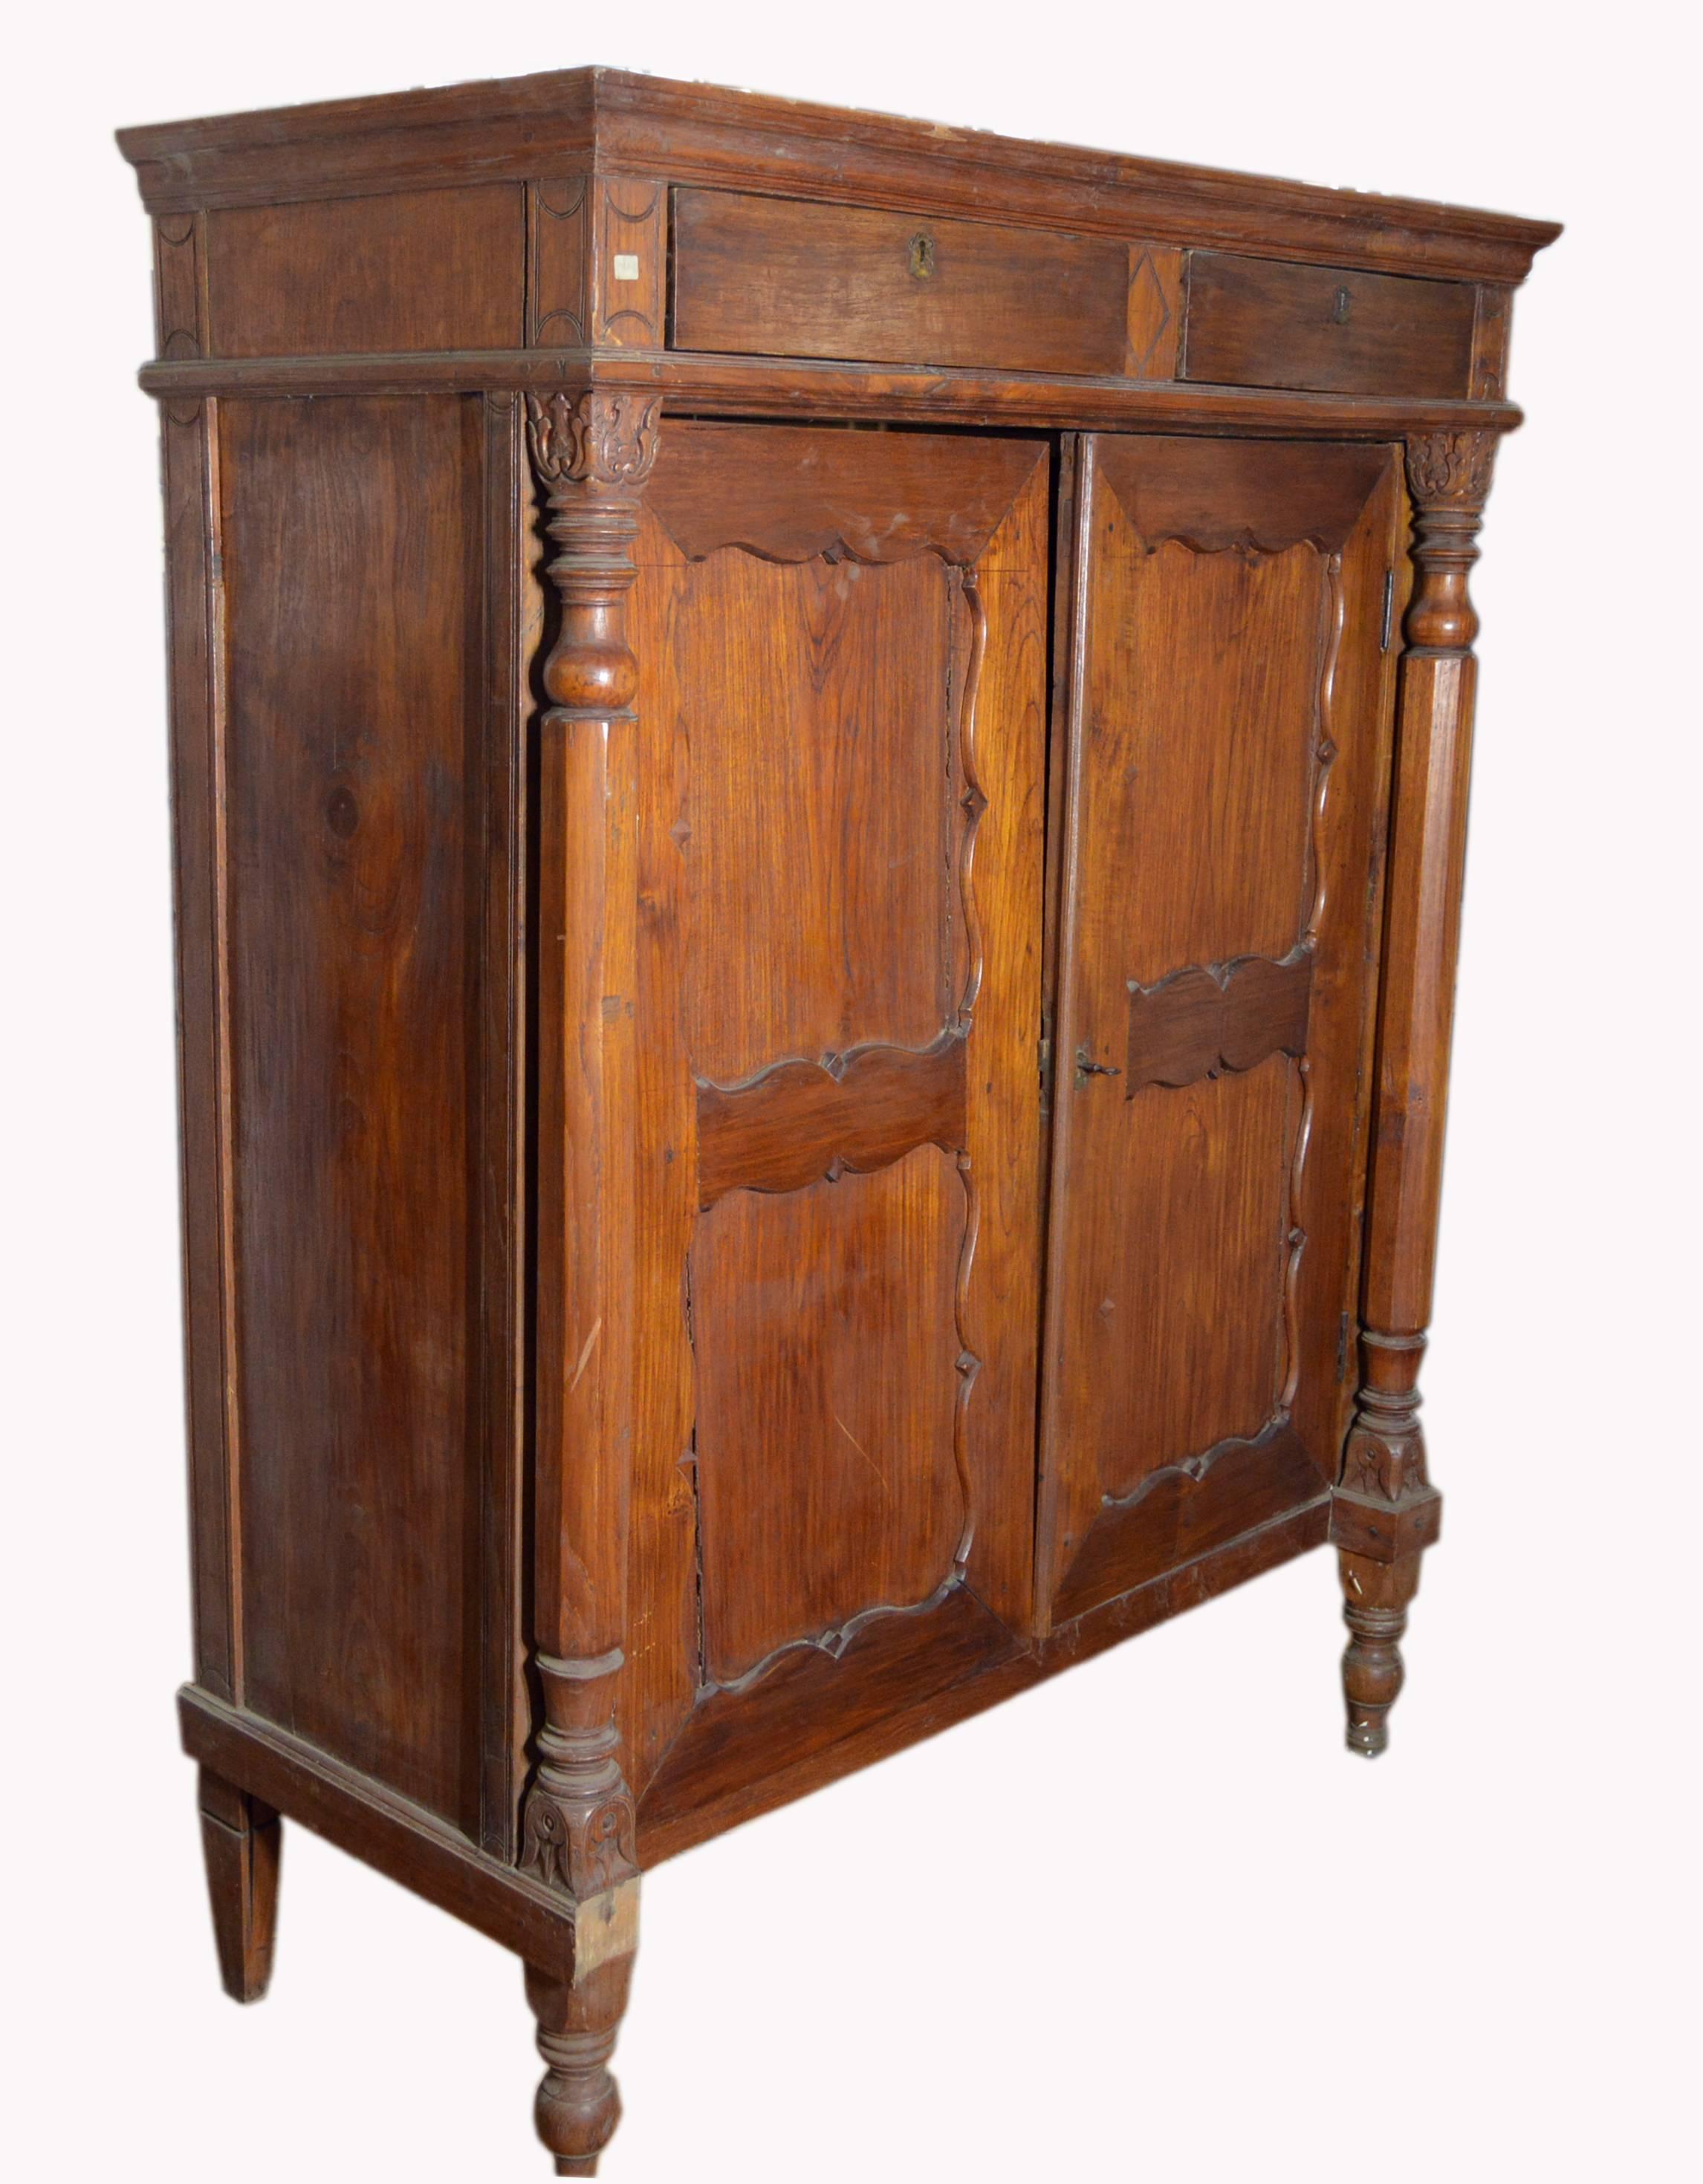 19th Century Dutch Colonial Lacquered Armoire with Columns and Paneled Doors 1